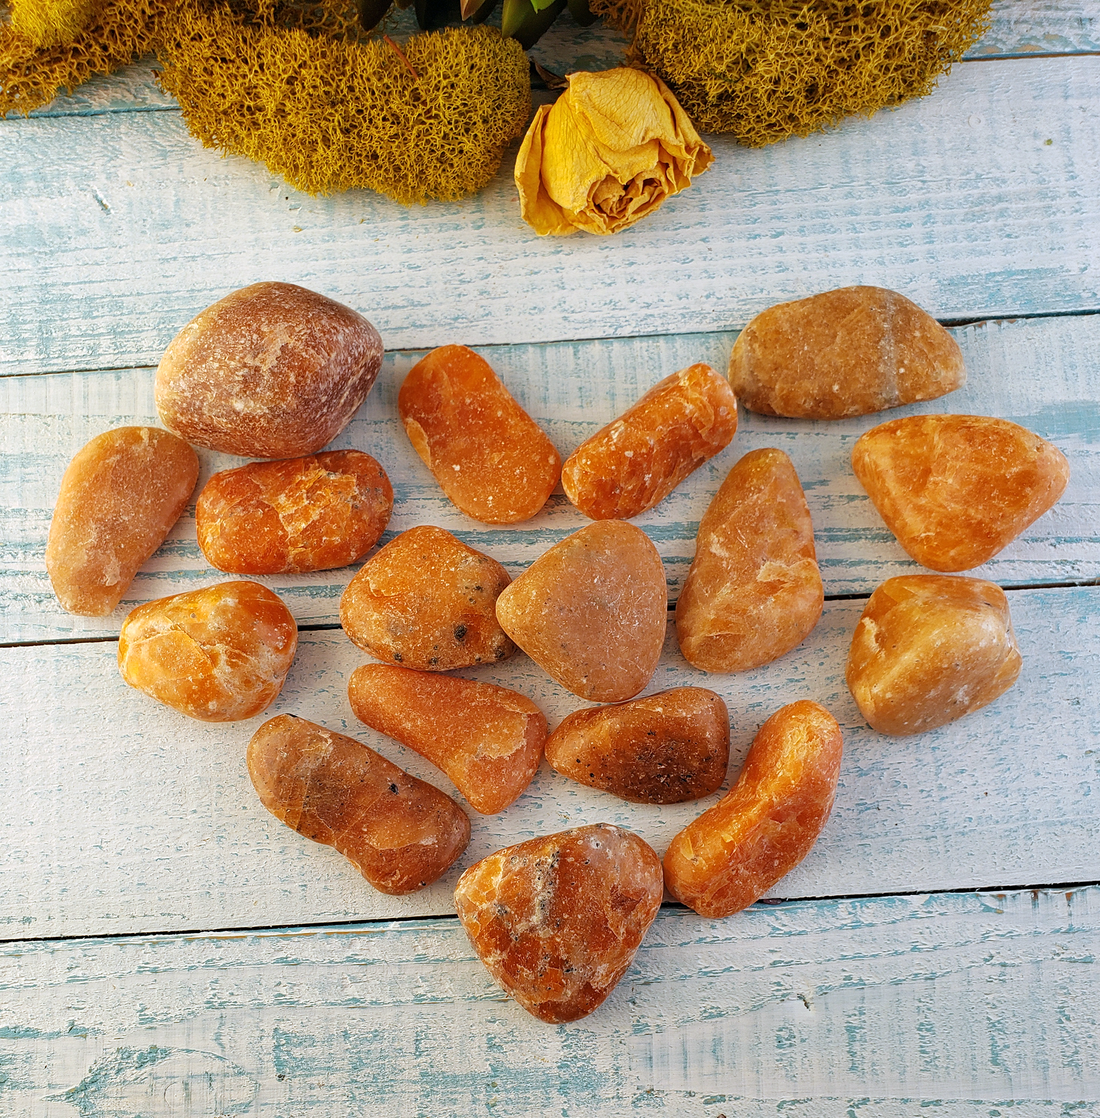 Orange Orchid Calcite Natural Semi-Tumbled Gemstone - FreeformOrchid Orange Calcite Semi-Tumbled Stone - One Stone - Heart Shaped